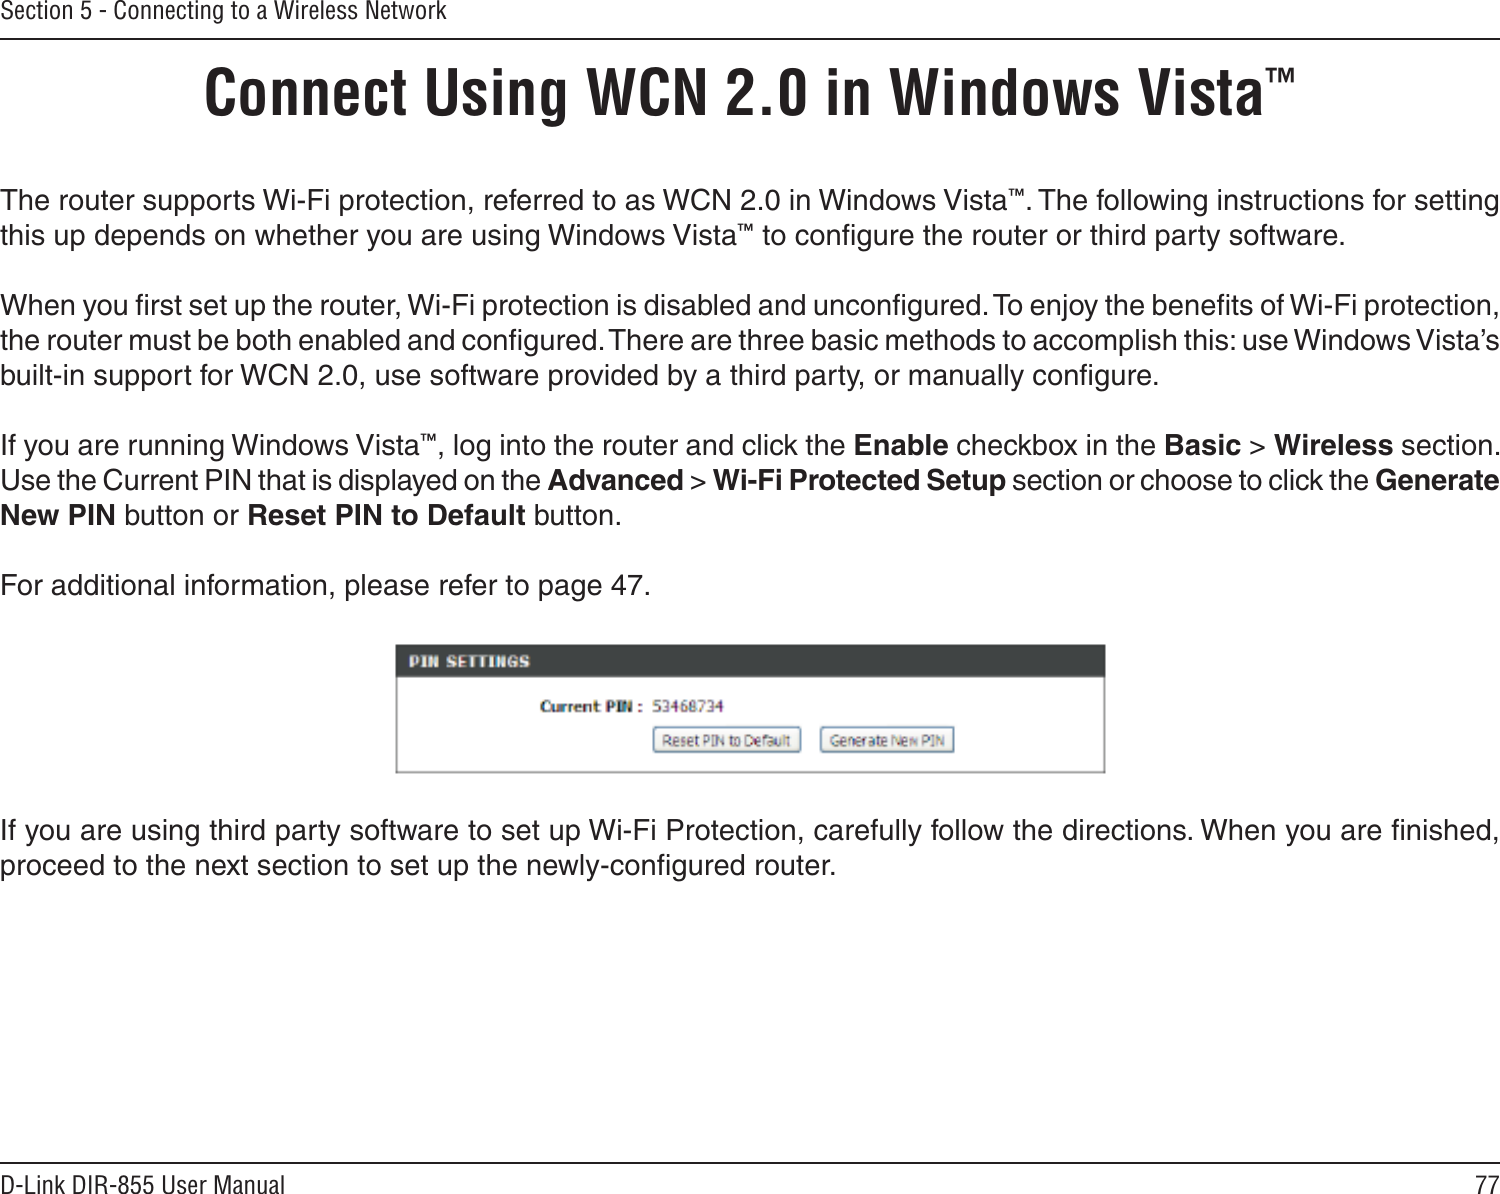 77D-Link DIR-855 User ManualSection 5 - Connecting to a Wireless NetworkConnect Using WCN 2.0 in Windows Vista™ The router supports Wi-Fi protection, referred to as WCN 2.0 in Windows Vista™. The following instructions for setting this up depends on whether you are using Windows Vista™ to conﬁgure the router or third party software.        When you ﬁrst set up the router, Wi-Fi protection is disabled and unconﬁgured. To enjoy the beneﬁts of Wi-Fi protection, the router must be both enabled and conﬁgured. There are three basic methods to accomplish this: use Windows Vista’s built-in support for WCN 2.0, use software provided by a third party, or manually conﬁgure. If you are running Windows Vista™, log into the router and click the Enable checkbox in the Basic &gt; Wireless section. Use the Current PIN that is displayed on the Advanced &gt; Wi-Fi Protected Setup section or choose to click the Generate New PIN button or Reset PIN to Default button. For additional information, please refer to page 47.If you are using third party software to set up Wi-Fi Protection, carefully follow the directions. When you are ﬁnished, proceed to the next section to set up the newly-conﬁgured router. 